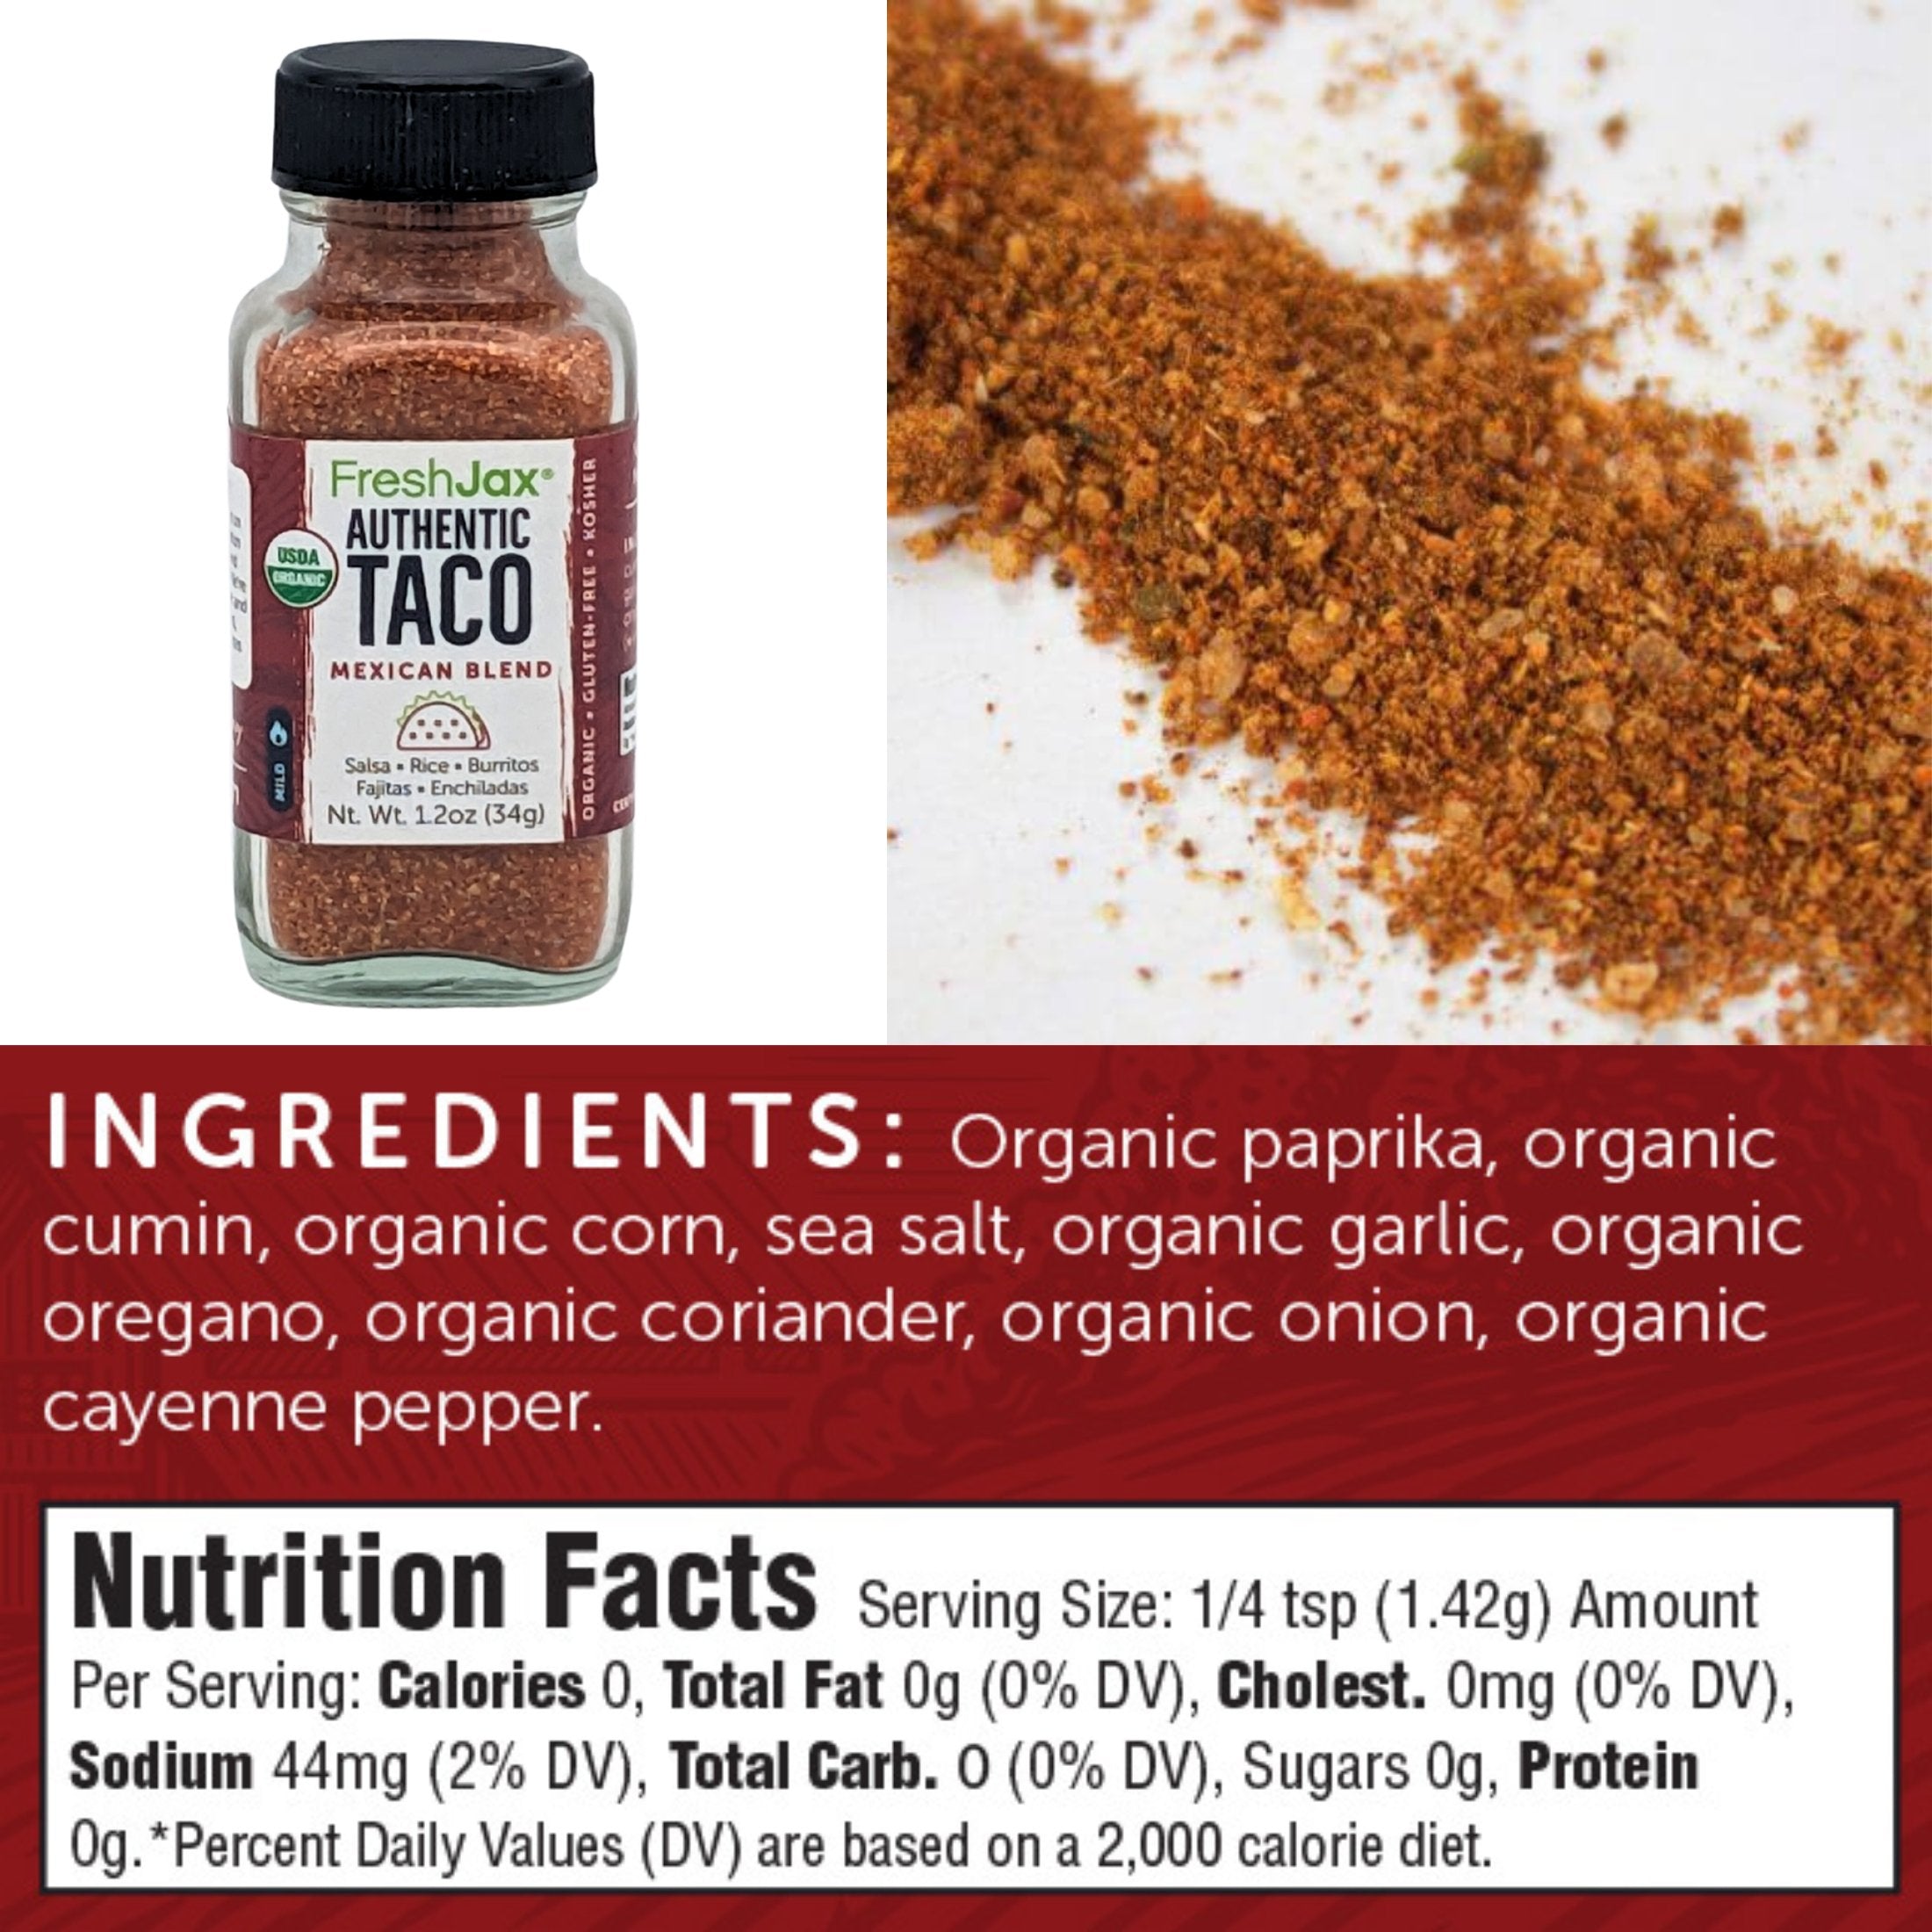 FreshJax Organic Spices Authentic Taco Seasoning Ingredients and Nutritional Information